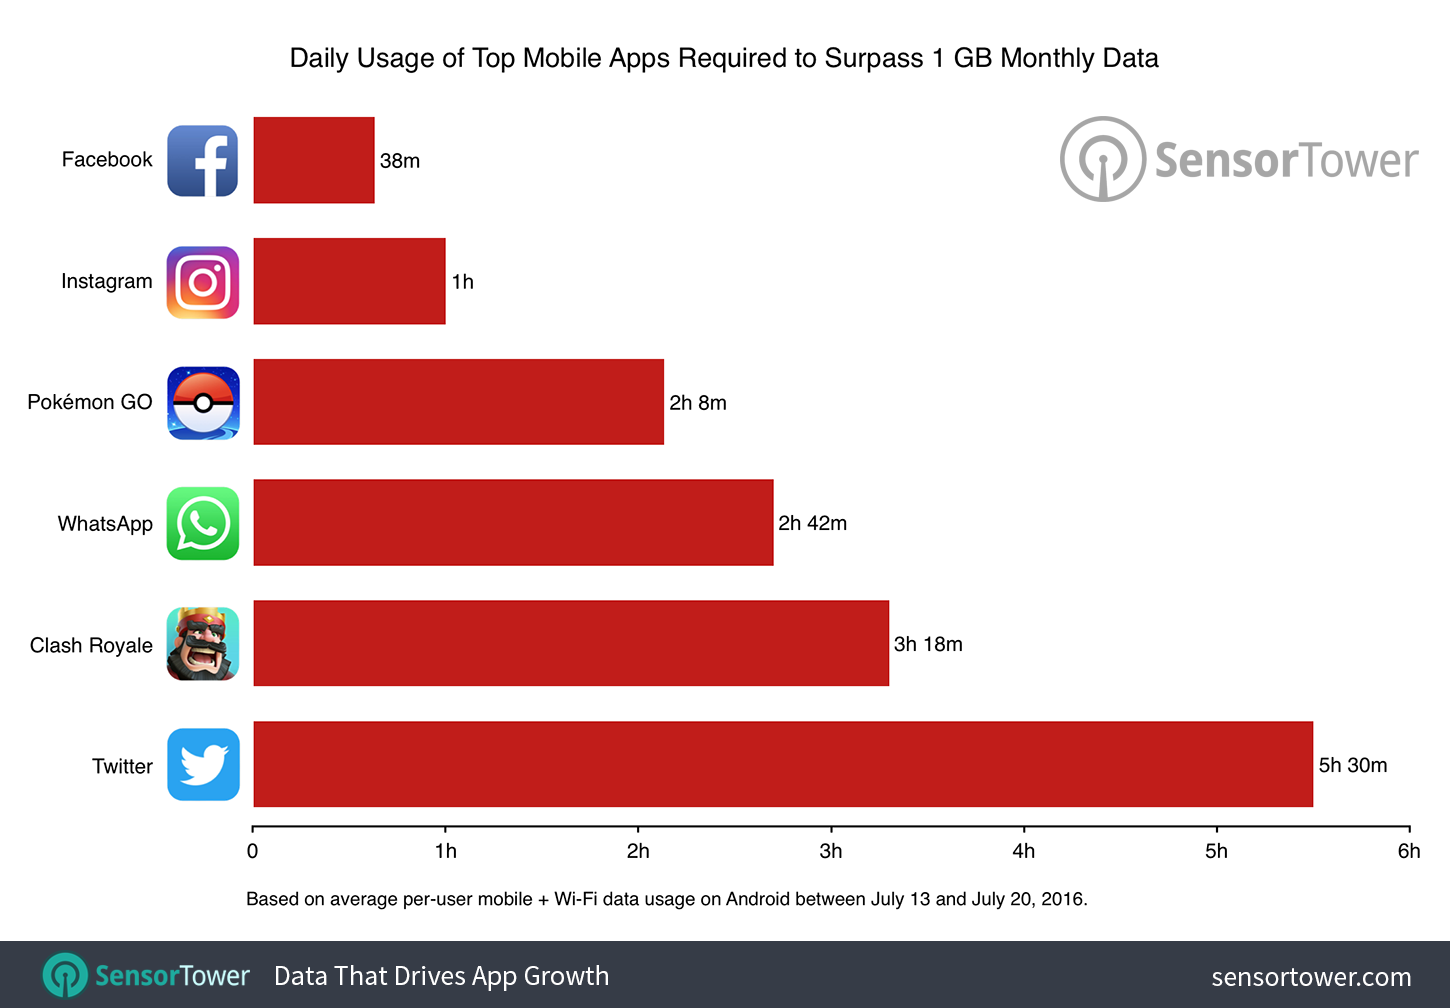 Average Daily Mobile Data Used by Pokemon GO Players, Compared to Top Mobile Apps